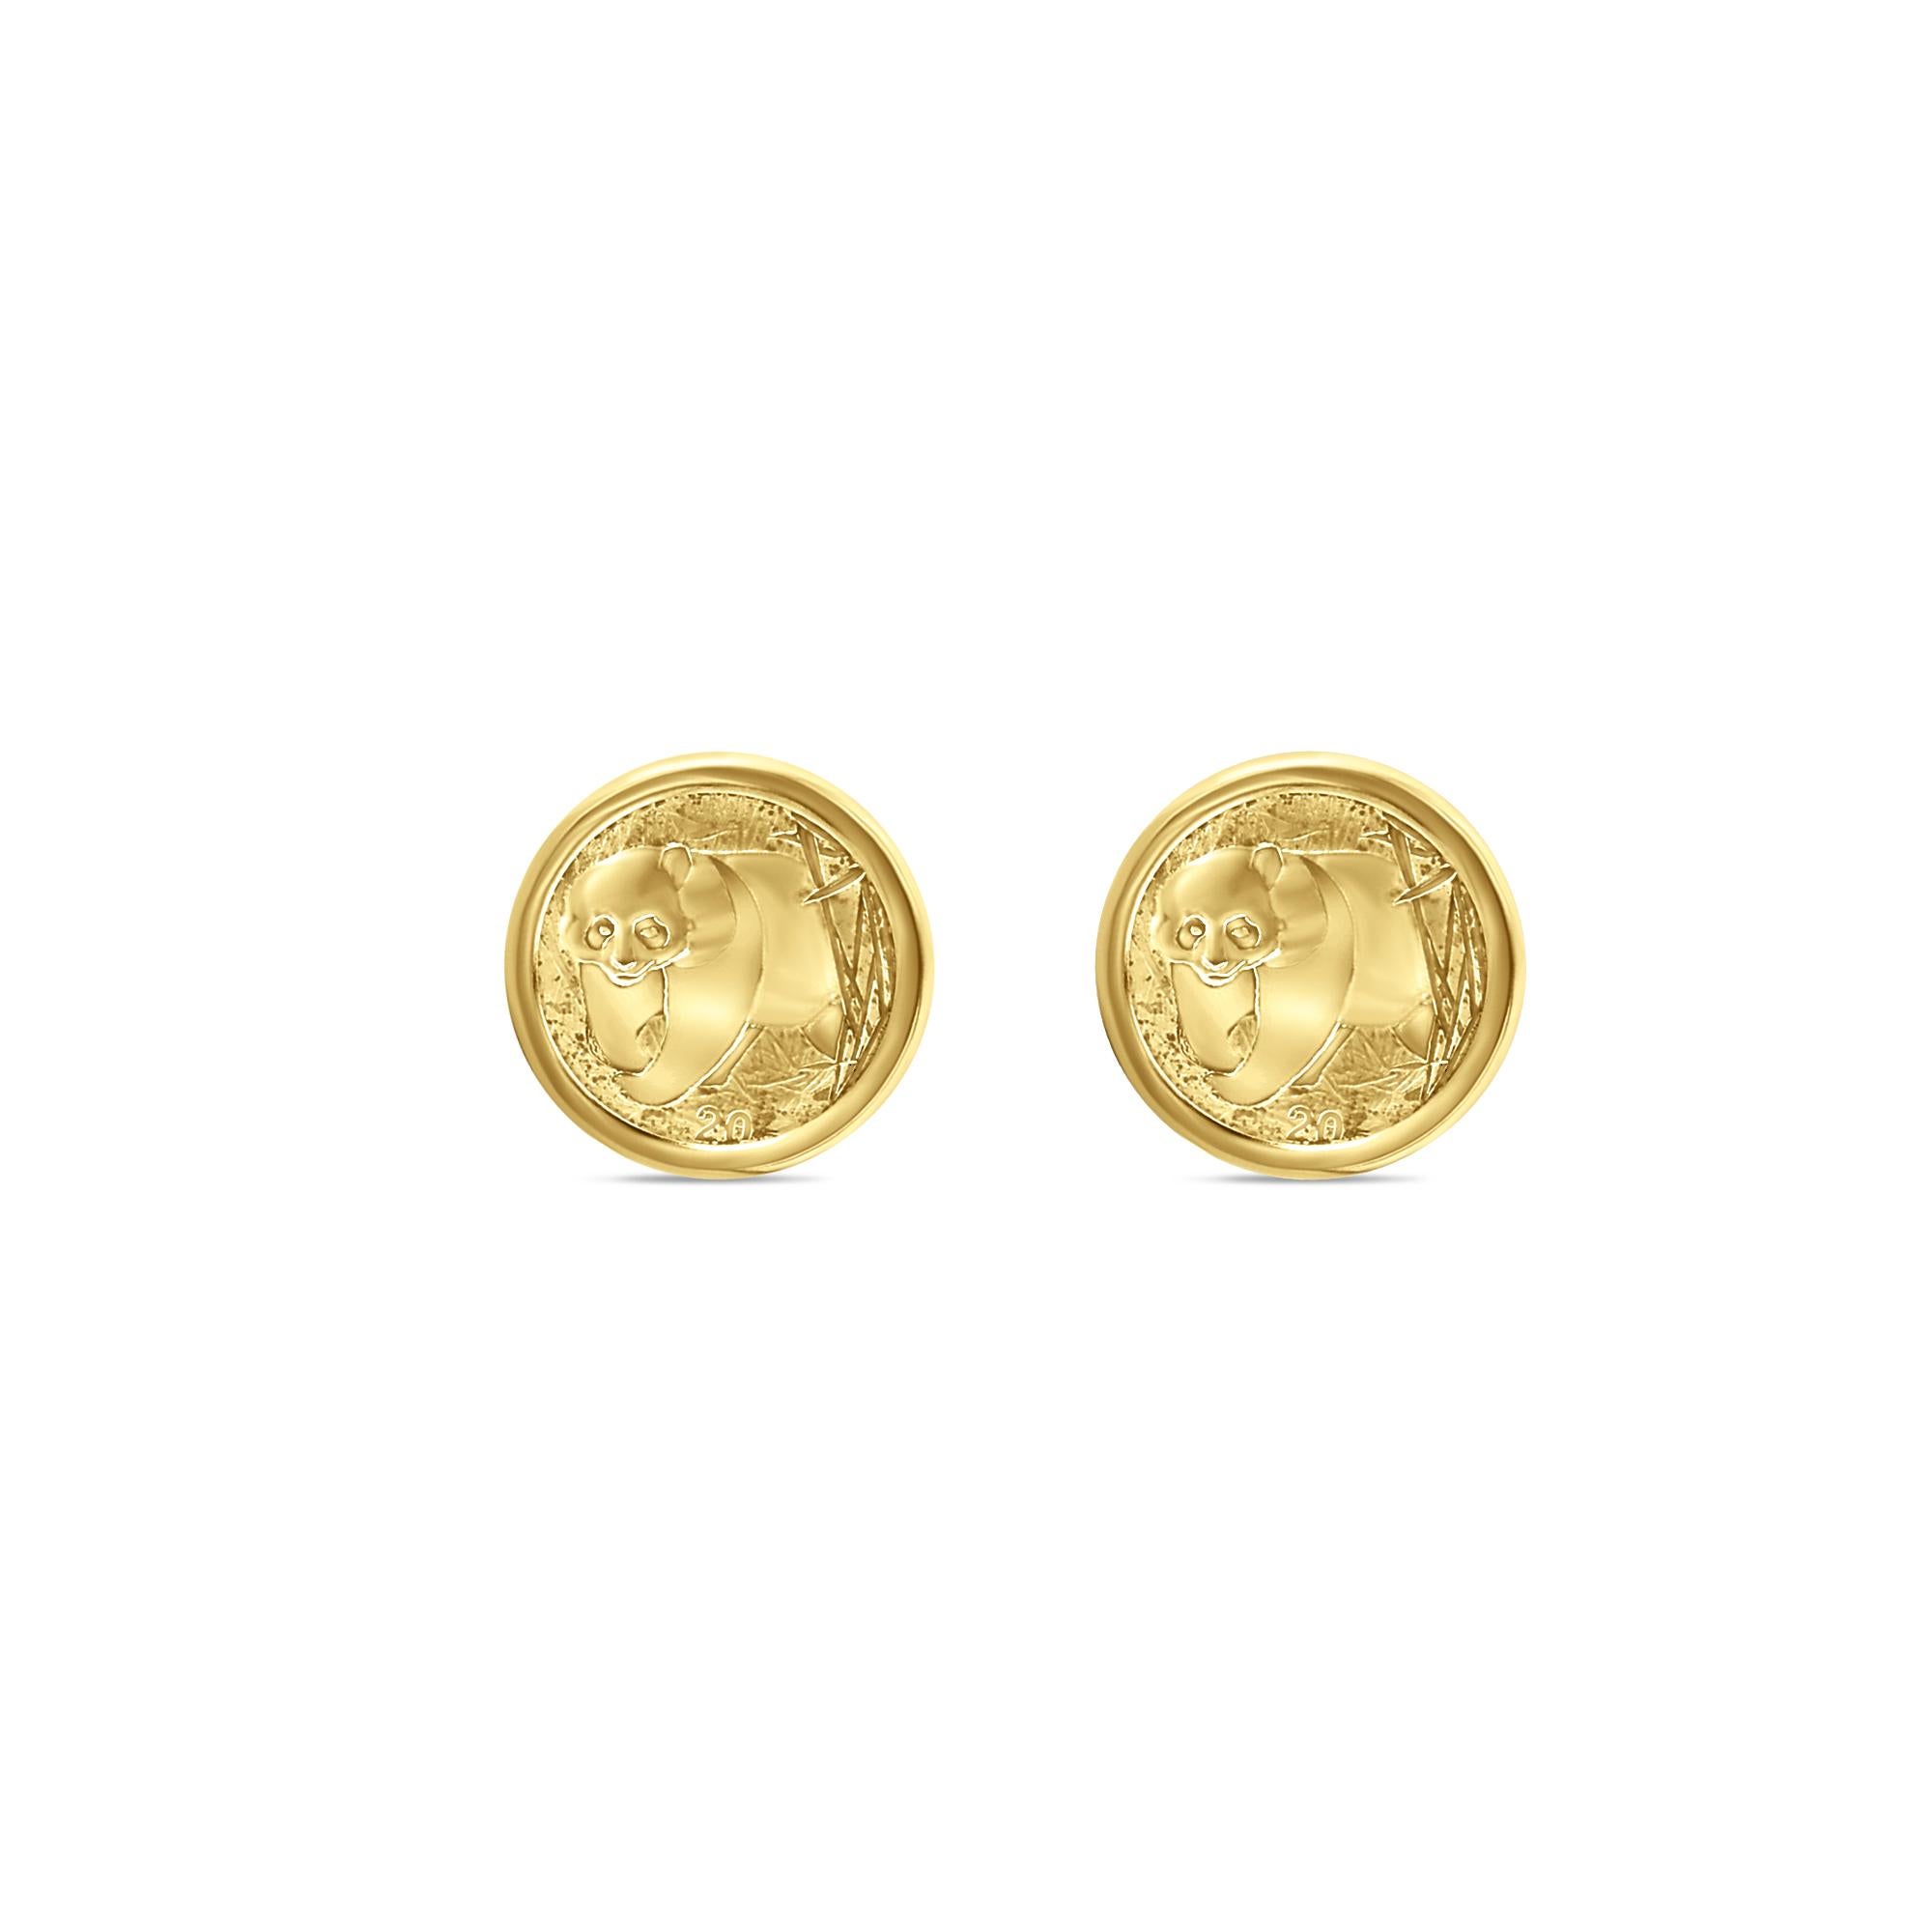 1/20OZ Panda Coin Cuff Links with 14k Yellow Gold Polished Bezel Frame Unisexe en vente